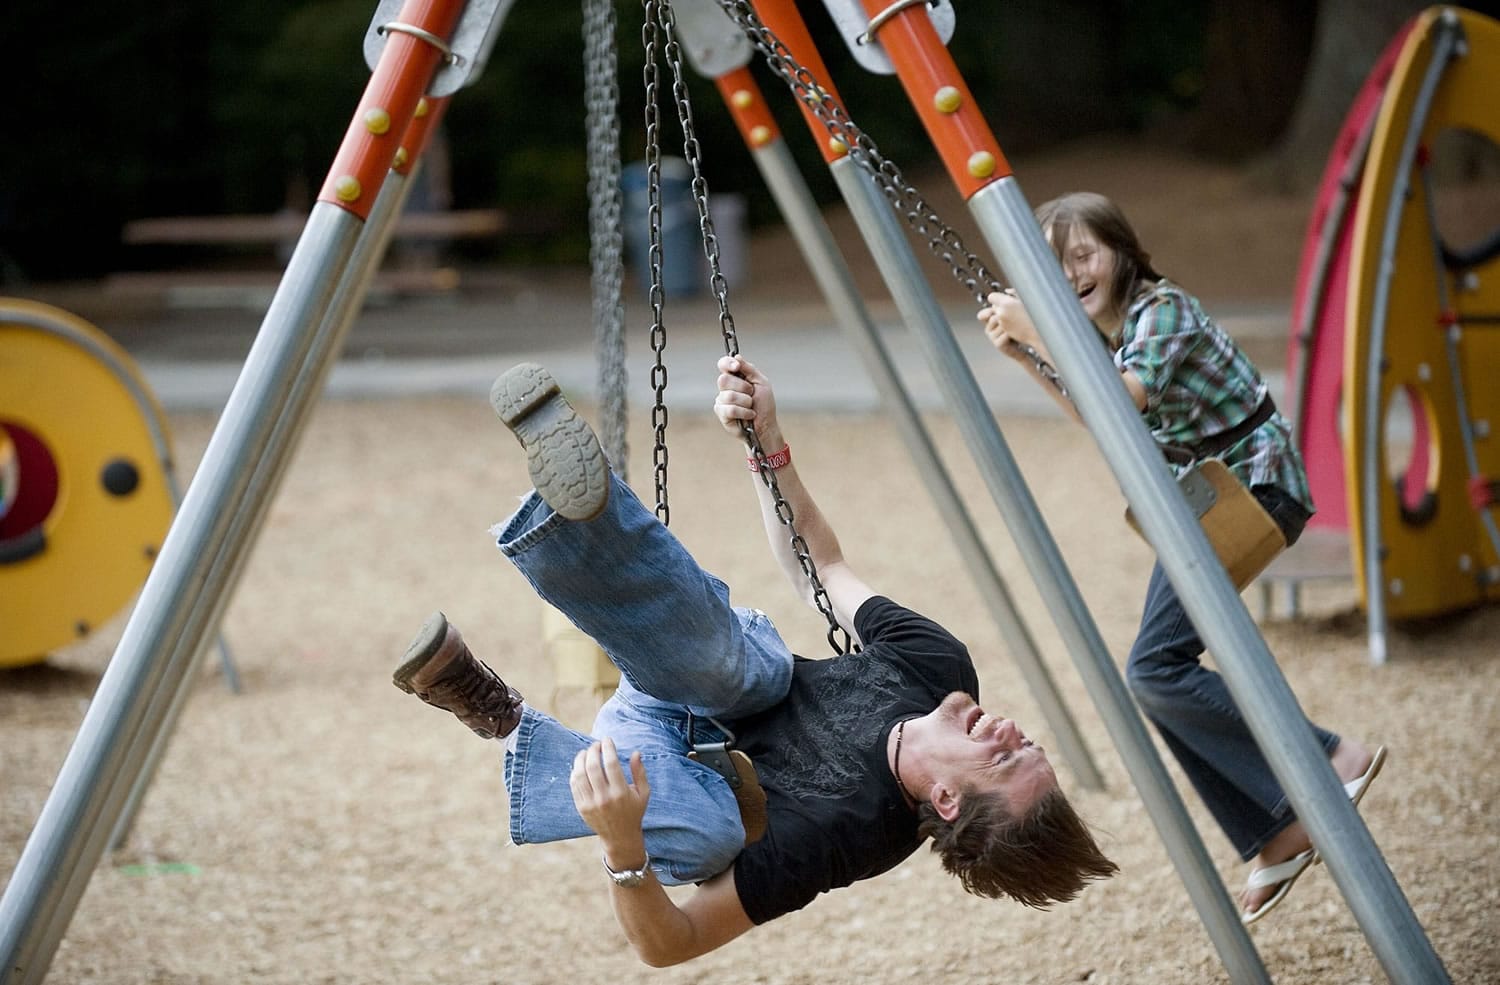 Sean Snyder and his daughter, Chloe Snyder, 9, play on the swings at Orchards Community Park in Orchards.